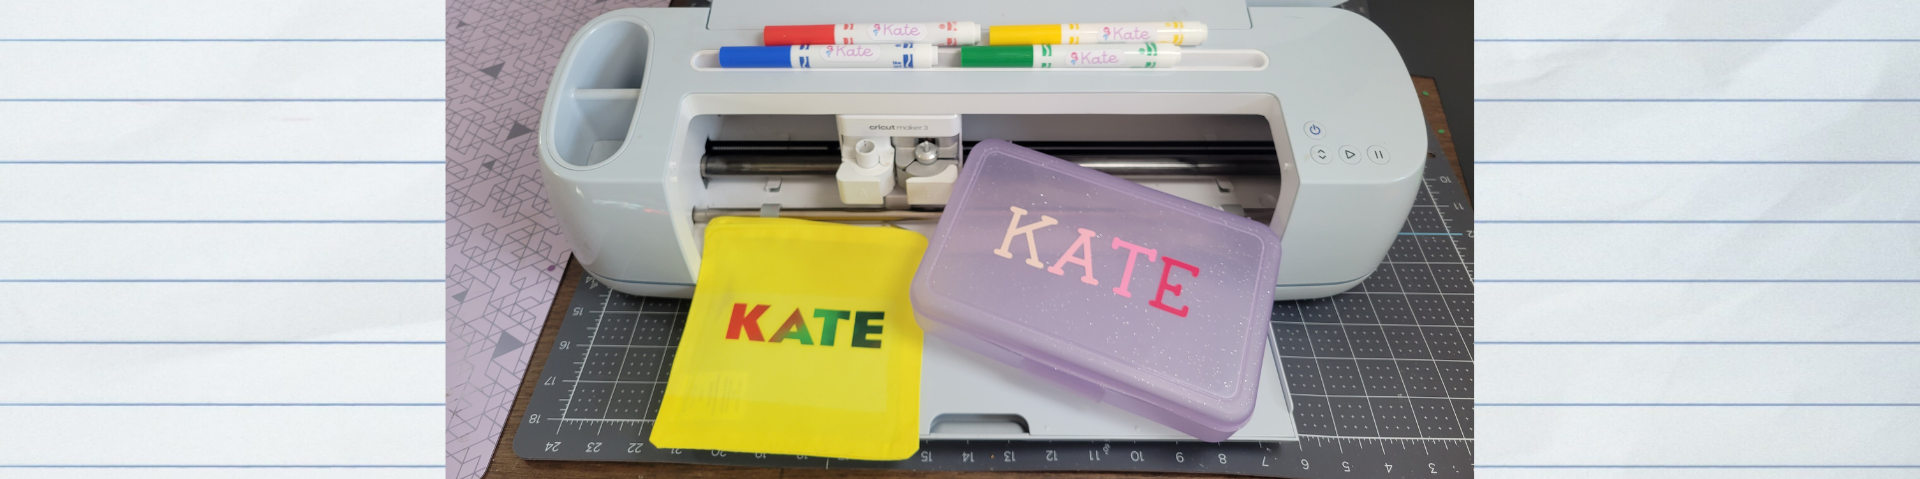 How to Label School Supplies with Cricut Vinyl, Infusible Ink, and Print then Cut // Back to School with Cricut